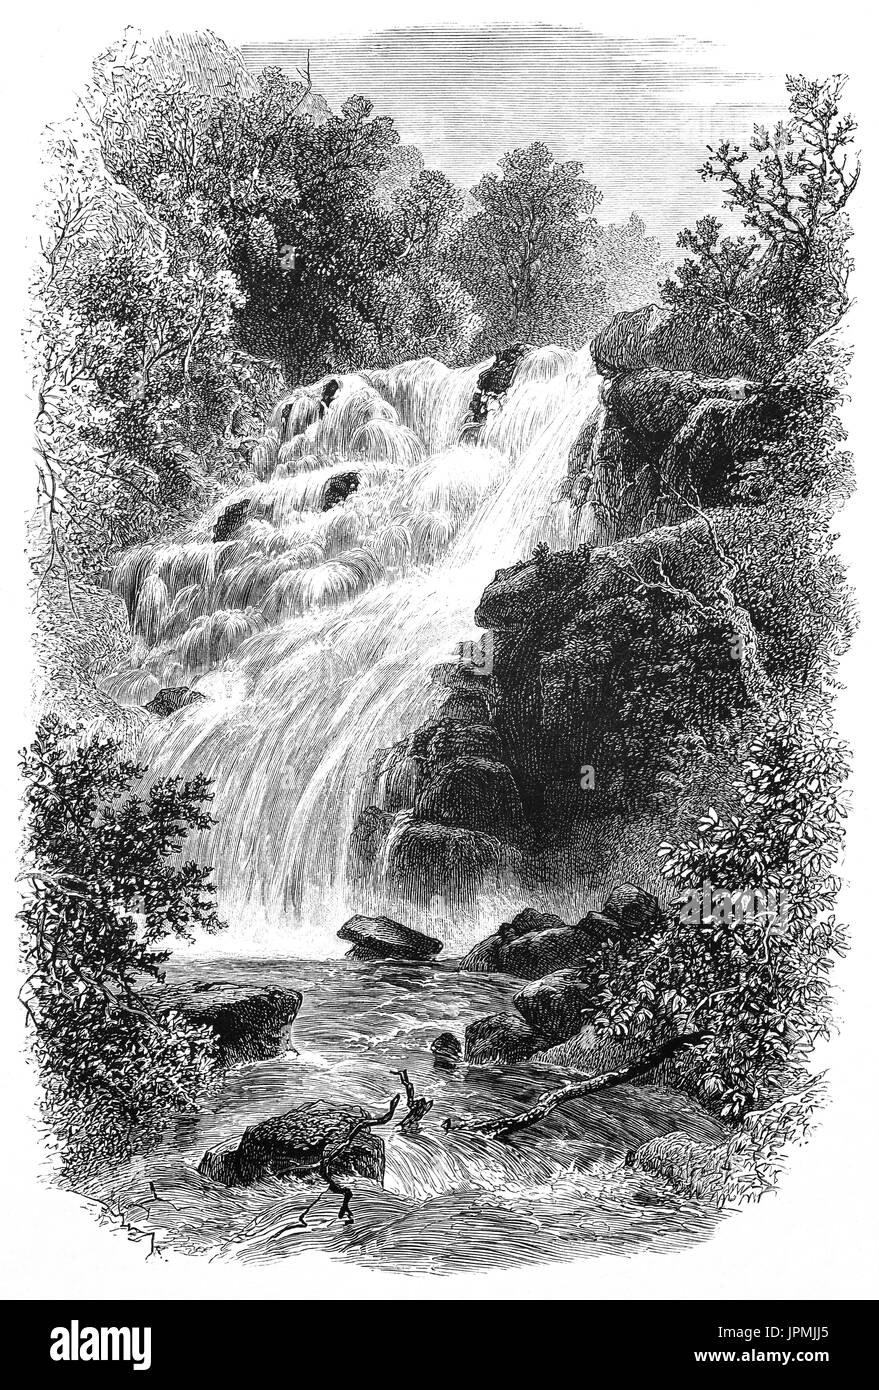 1870: Torc Waterfall or Torc Cascades is a waterfall of the  Owengarriff river at the base of Torc Mountain, near Killarney in the Ring of Kerry, in Killarney National Park, County Kerry, Ireland. Stock Photo